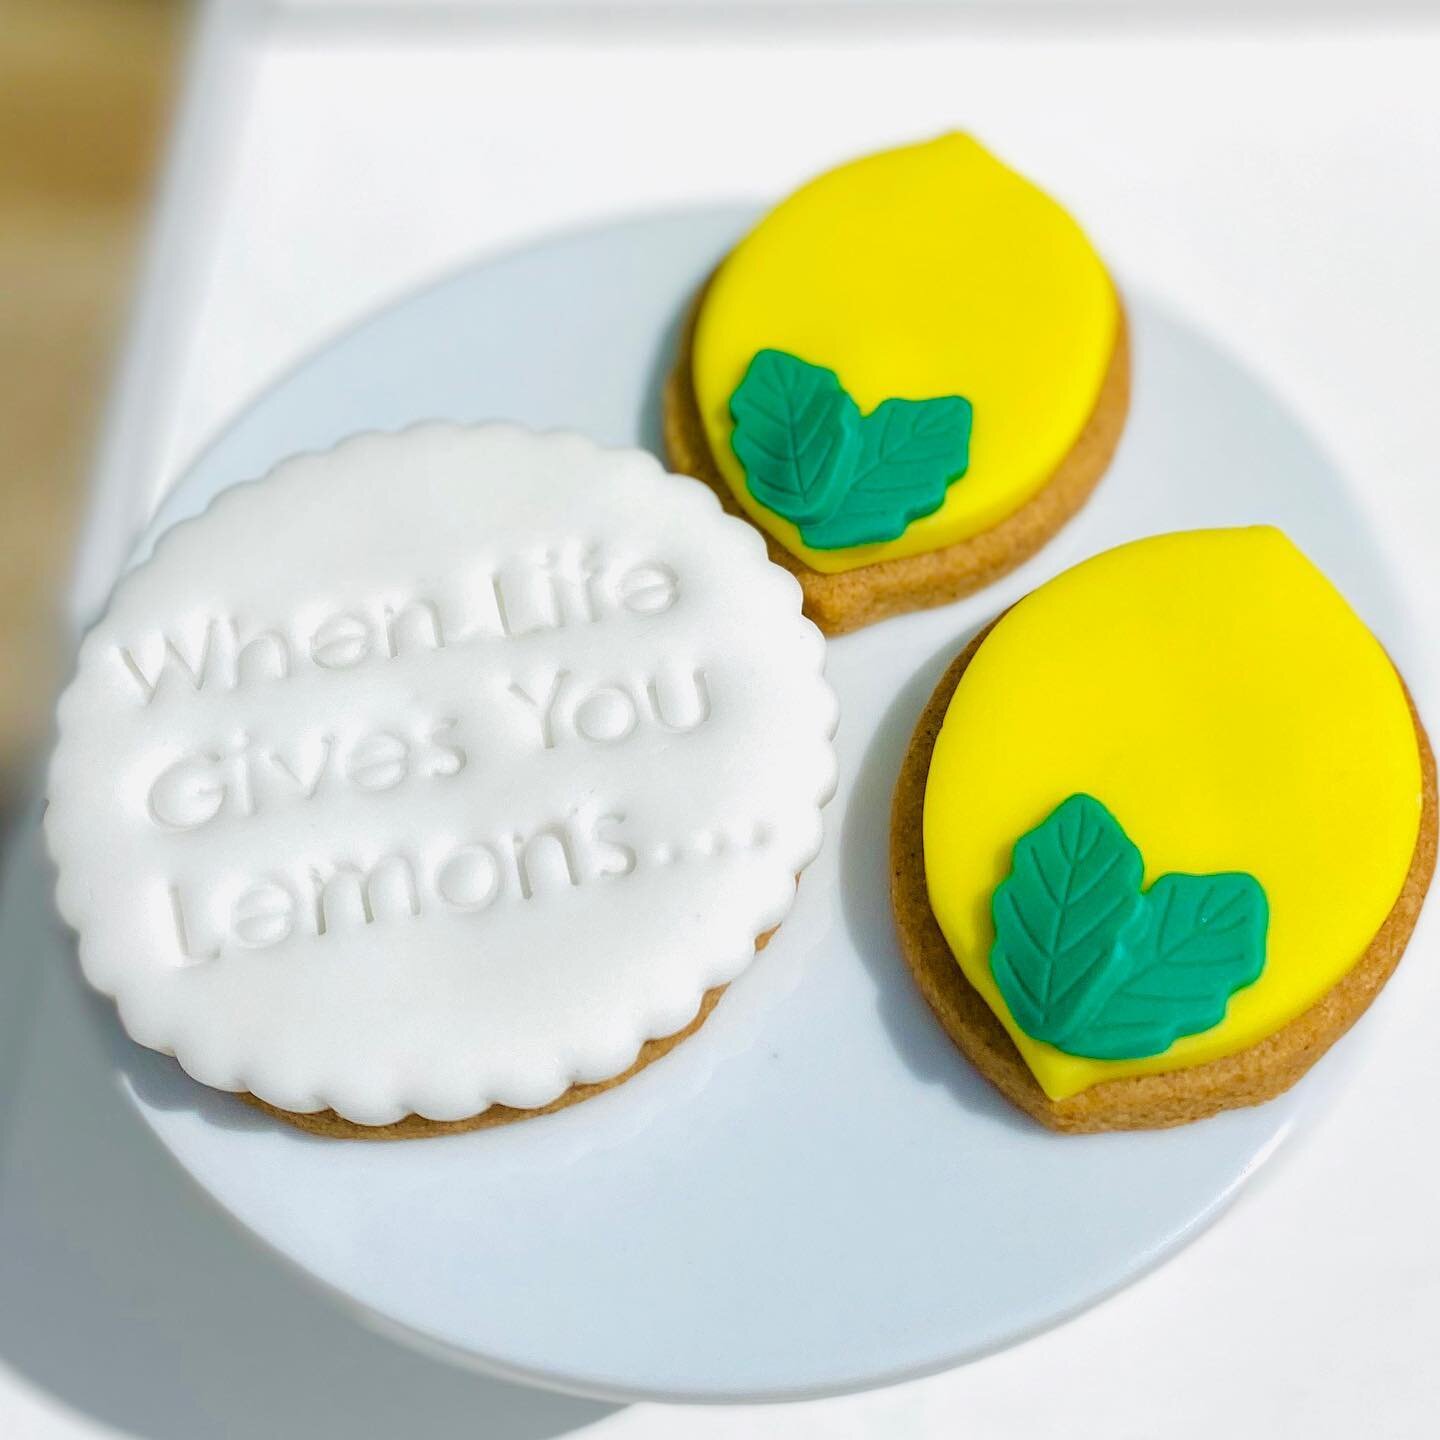 Final shot of our &lsquo;when life gives you lemons&rsquo; party. We absolutely loved the fresh colours and feel of this party. These personalised cookies were the perfect sweet treat to enjoy with a glass of homemade lemonade. 🍋